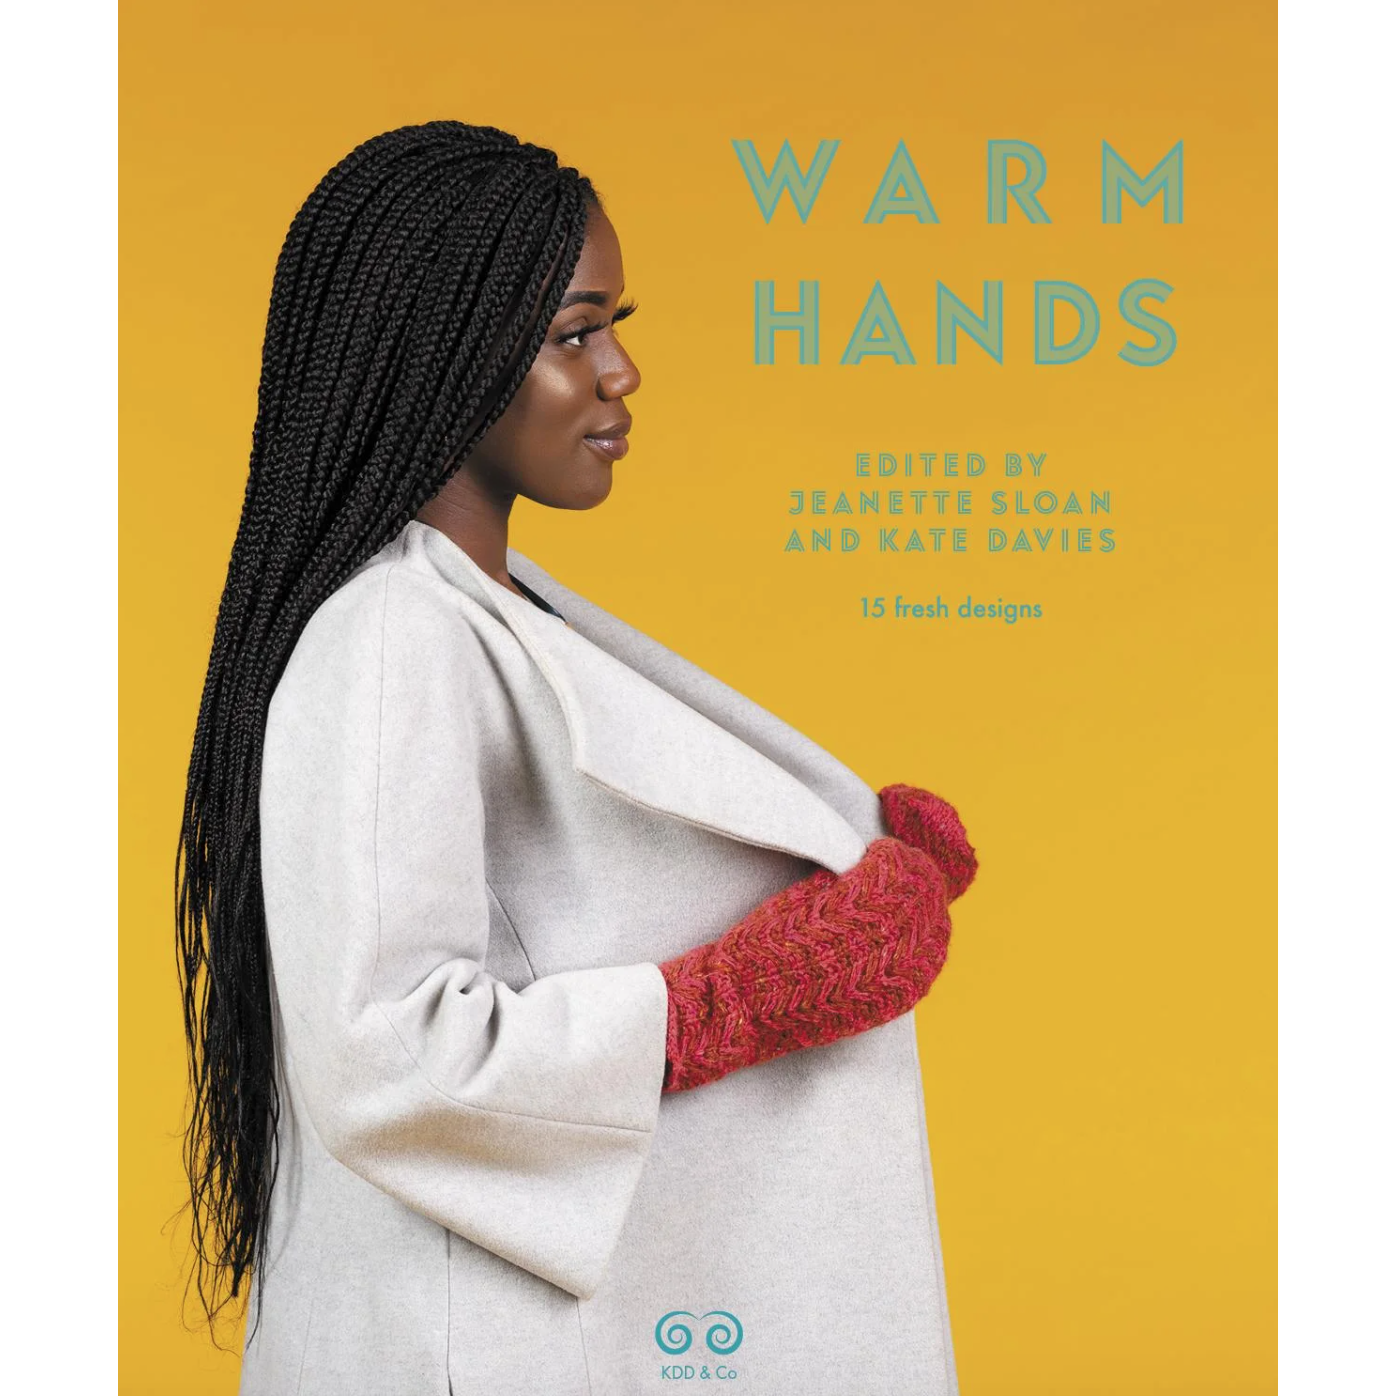 Warm Hands (Jeanette Sloan and Kate Davies)